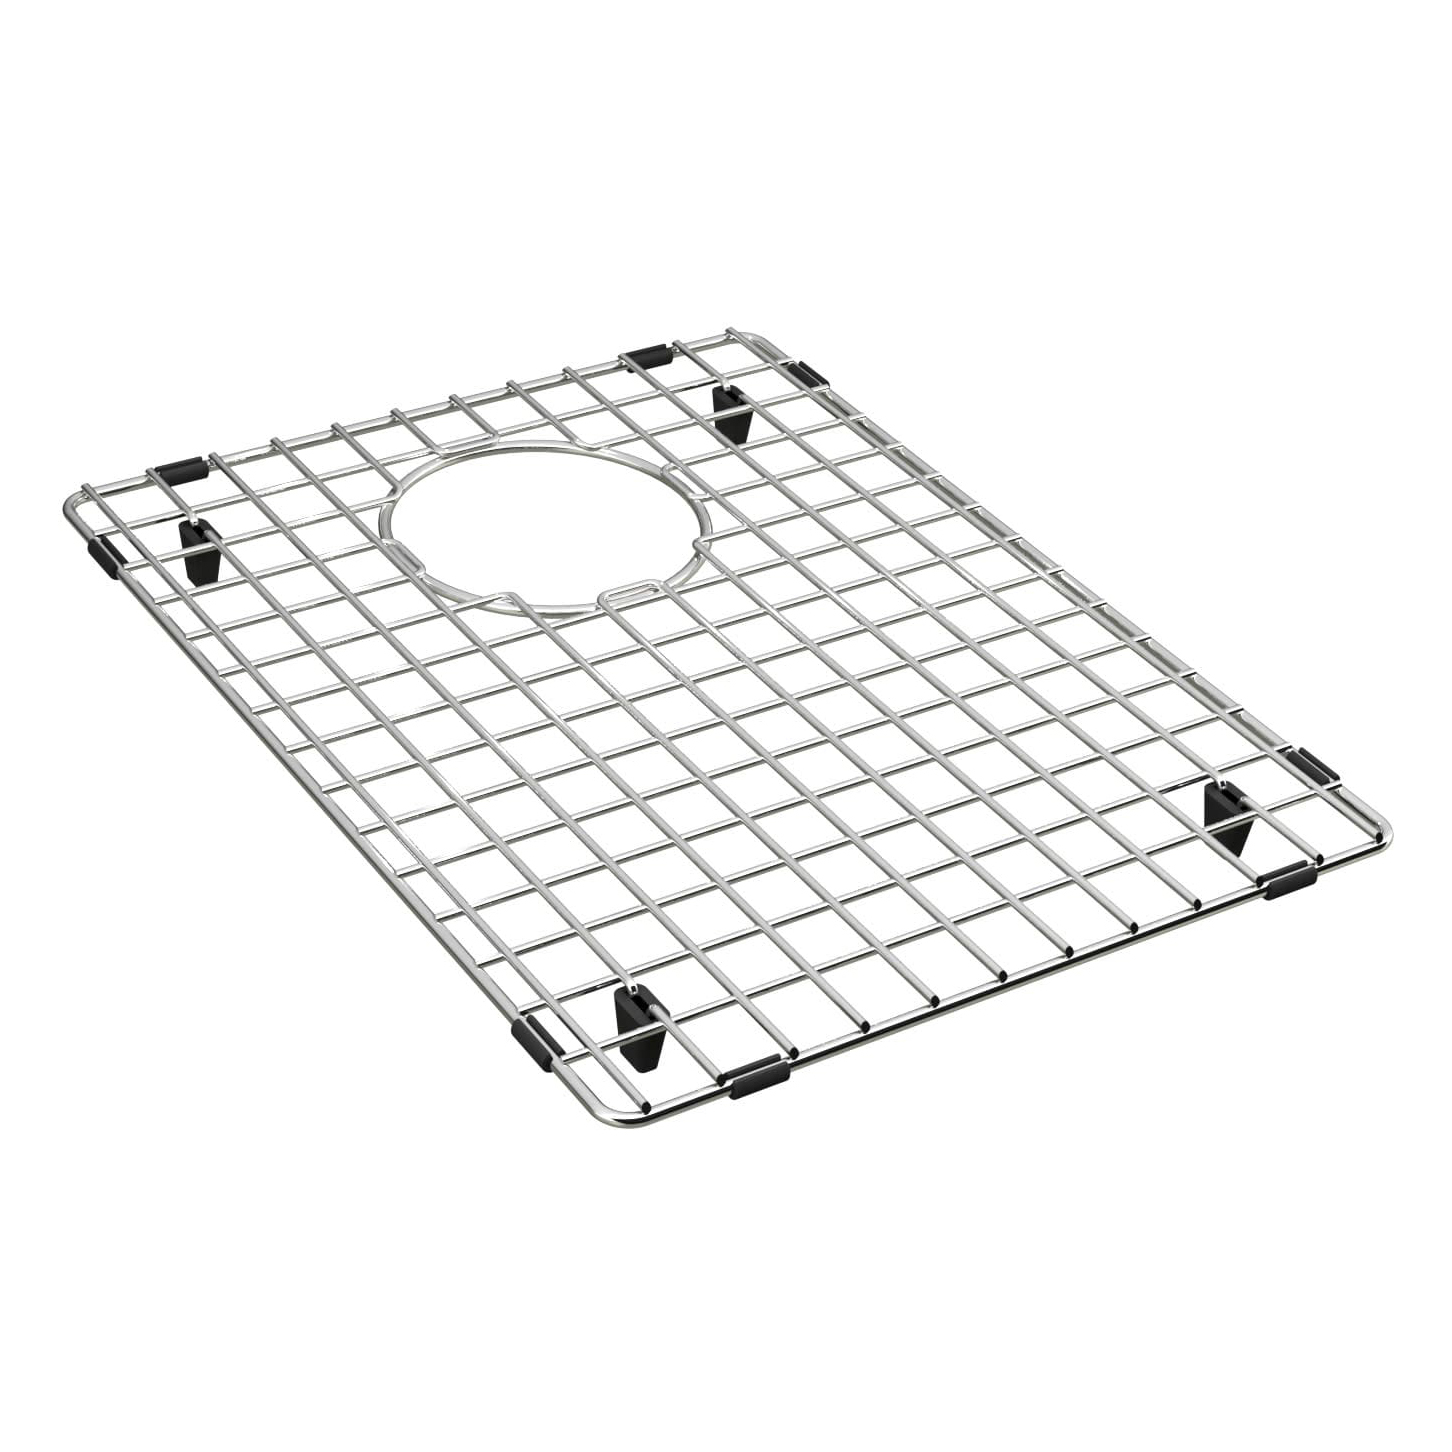 Cube 11-15/16x15-1/2" Stainless Steel Bottom Sink Grid